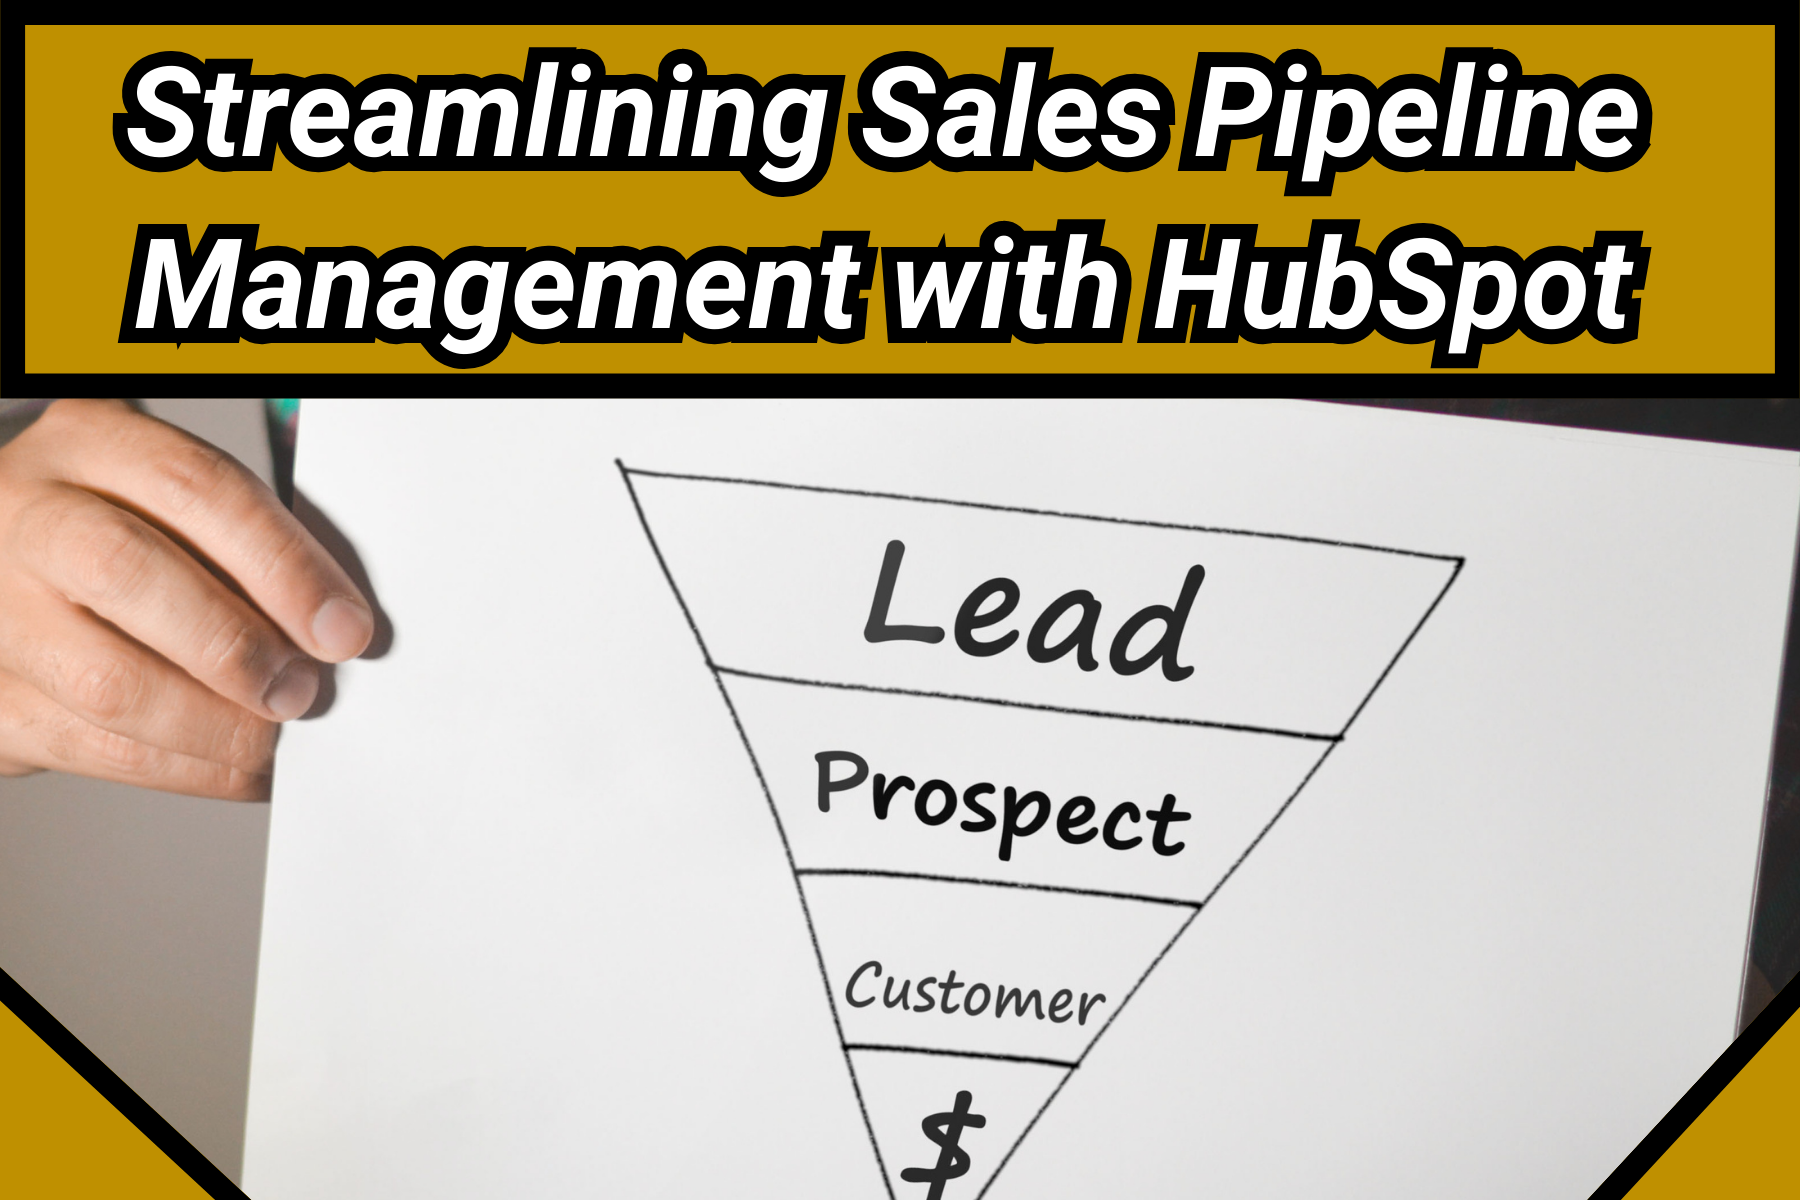 Streamlining Sales Pipeline Management with HubSpot